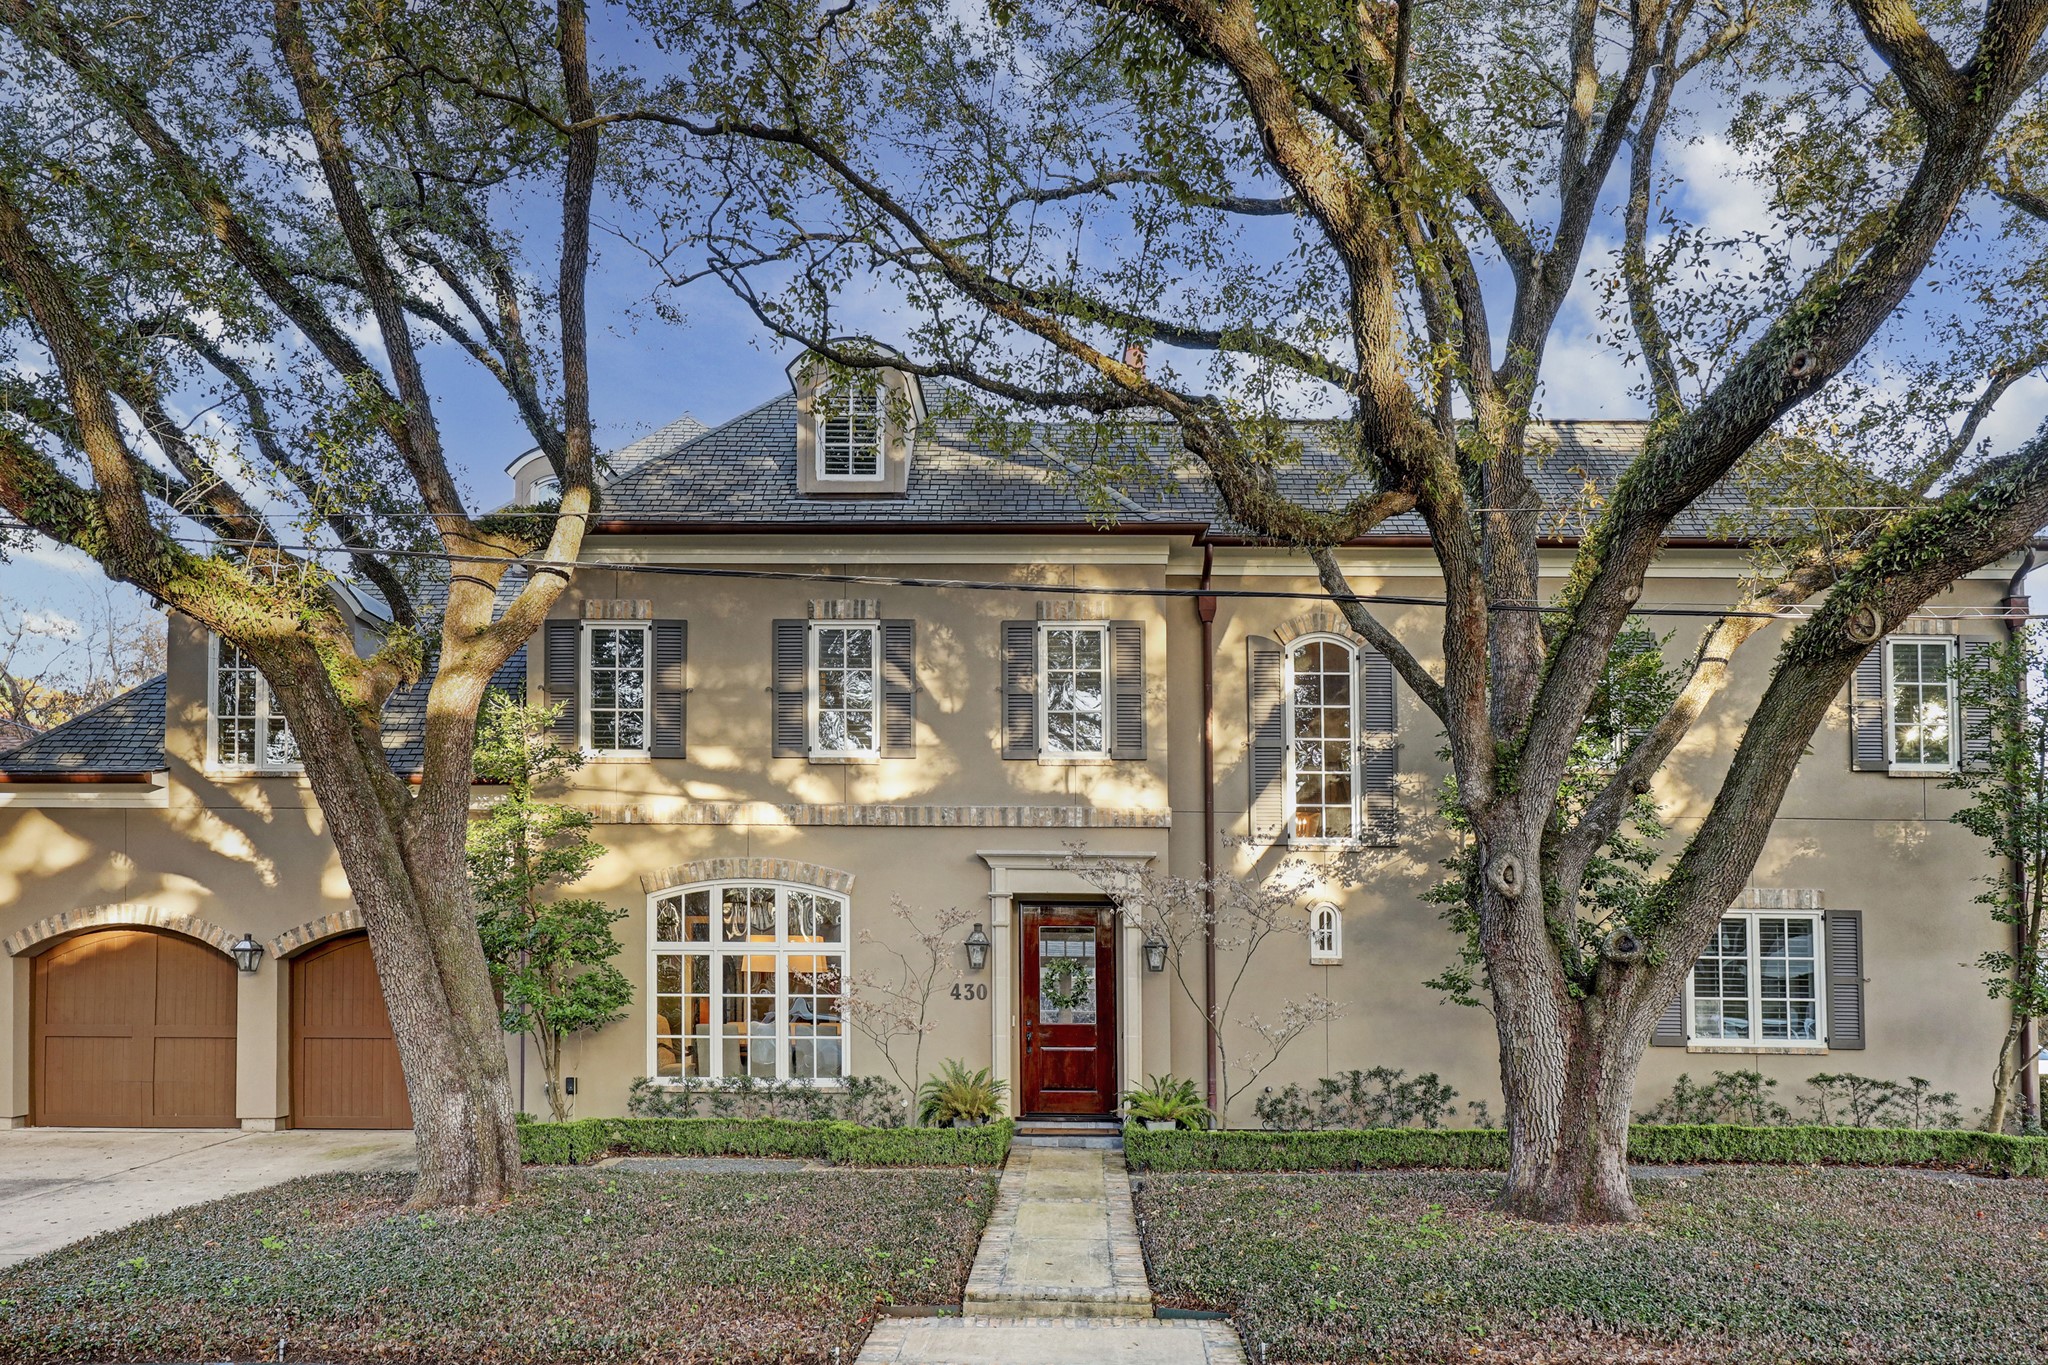 Stunning Country French home on corner lot, custom designed by award-winning Houston architects, Robert Dame Designs. Impeccable custom construction & high-quality engineering. Three blocks from new entrance to Memorial Park!